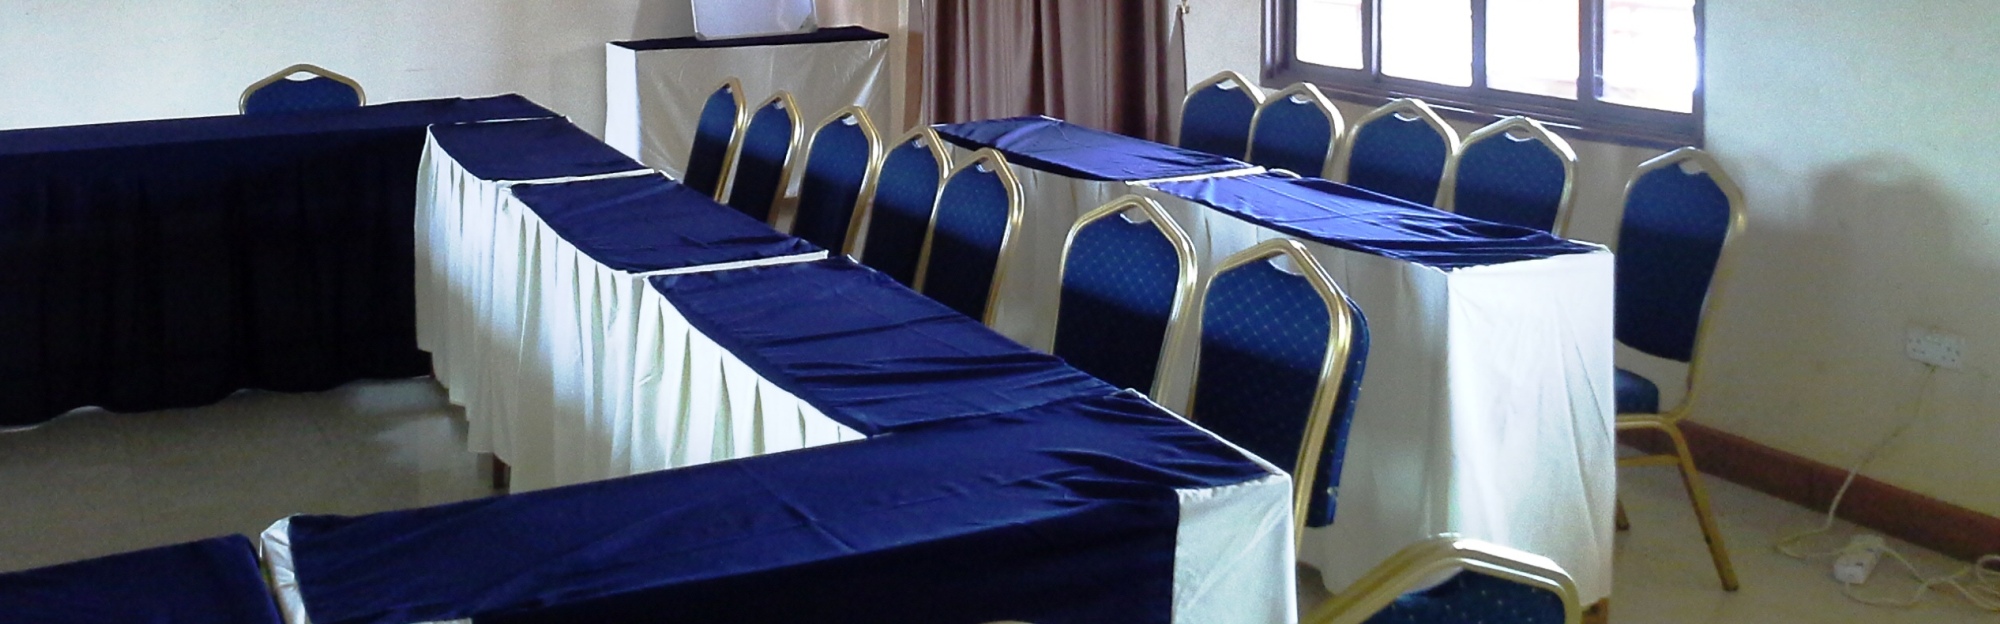 Viola Hotel Mbale Parties & Conferences